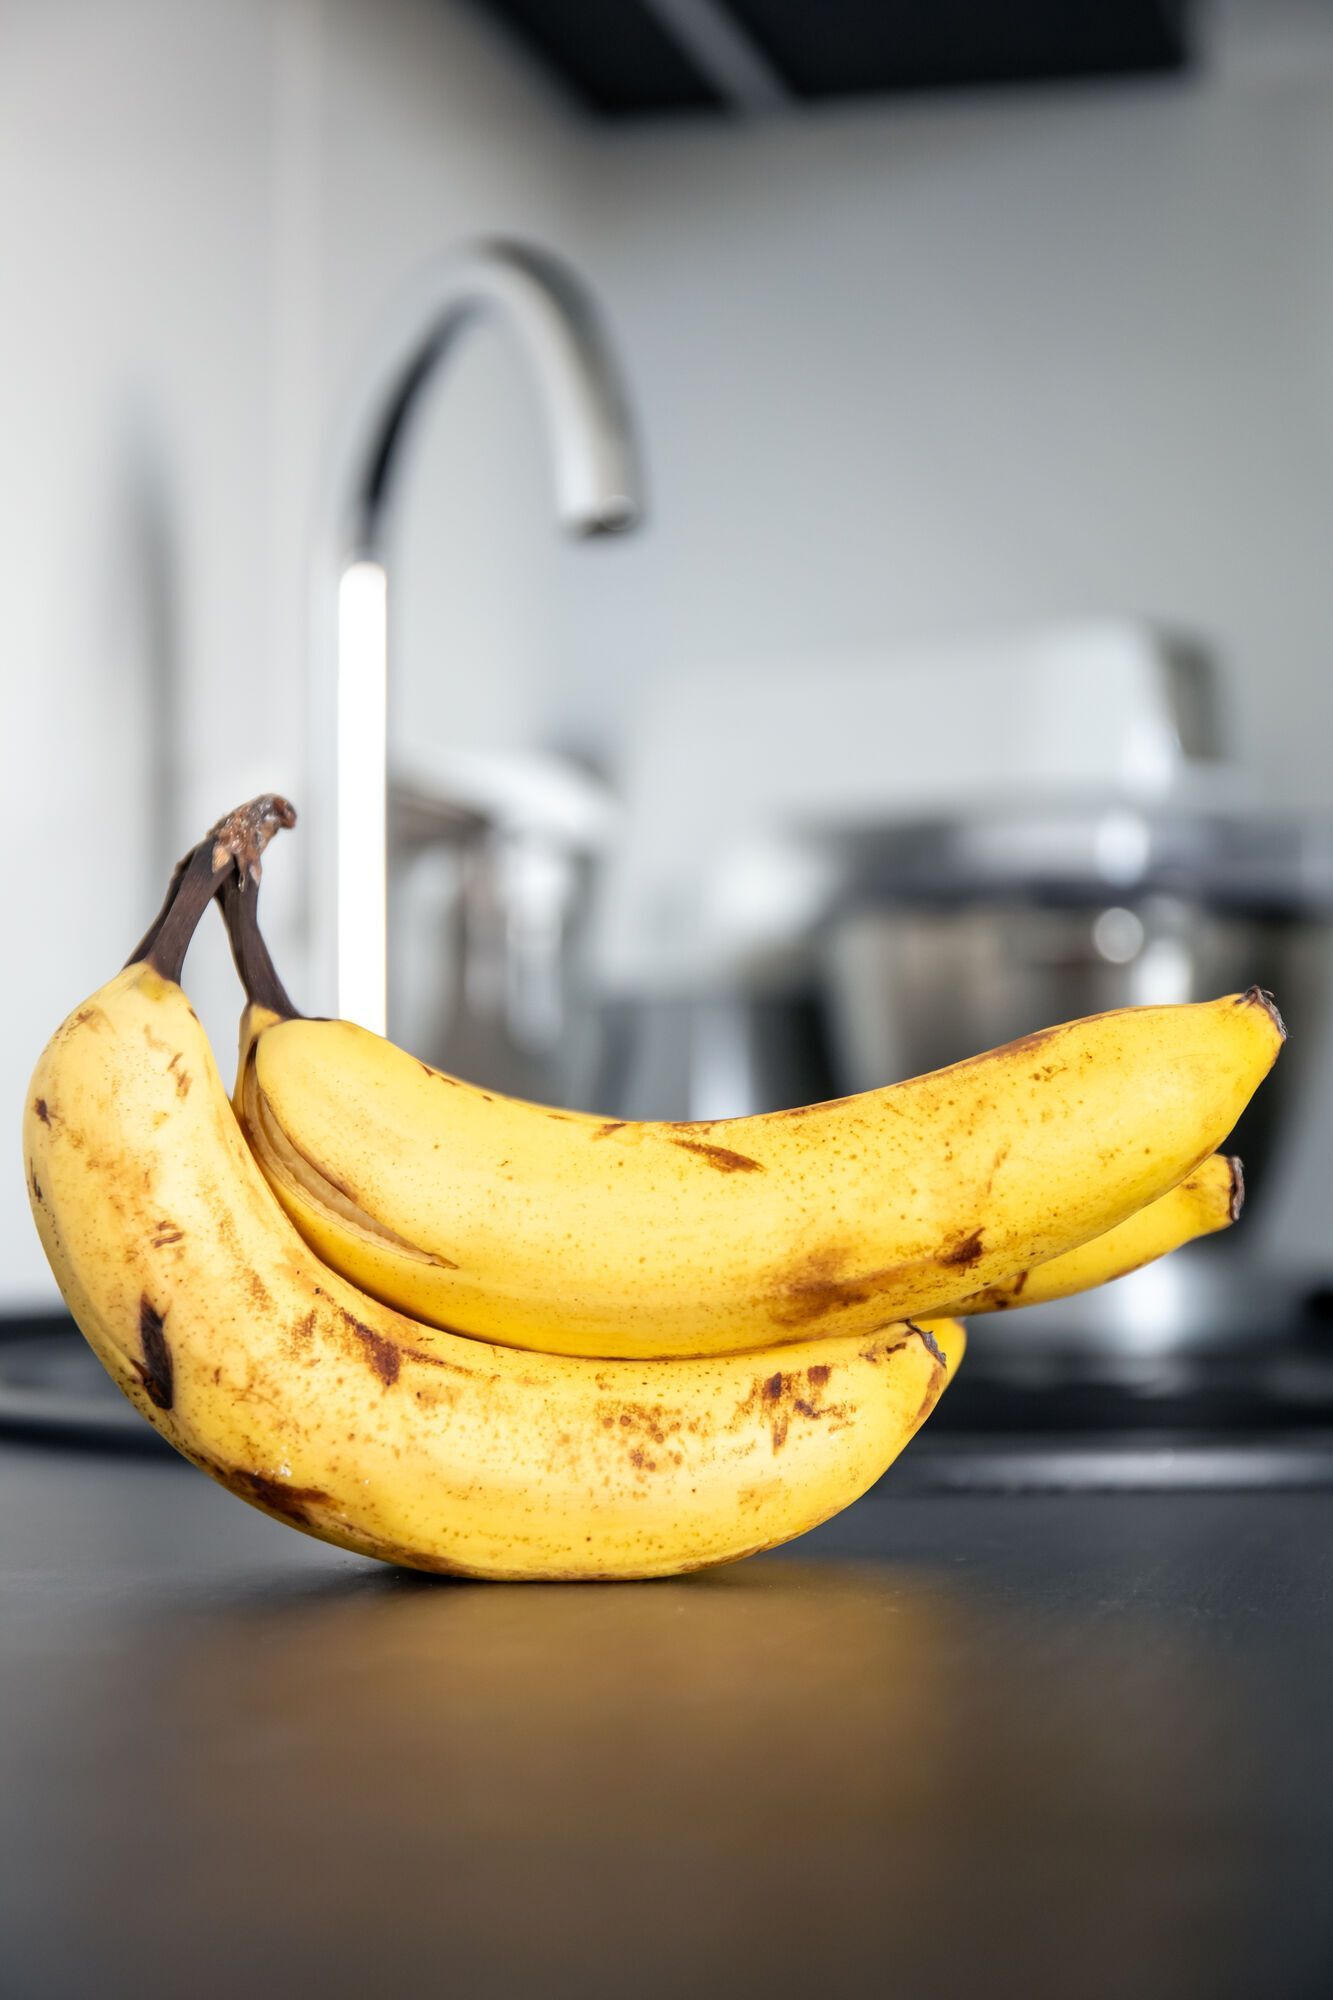 How to keep bananas yellow and free of dark spots for 26 days: an effective life hack